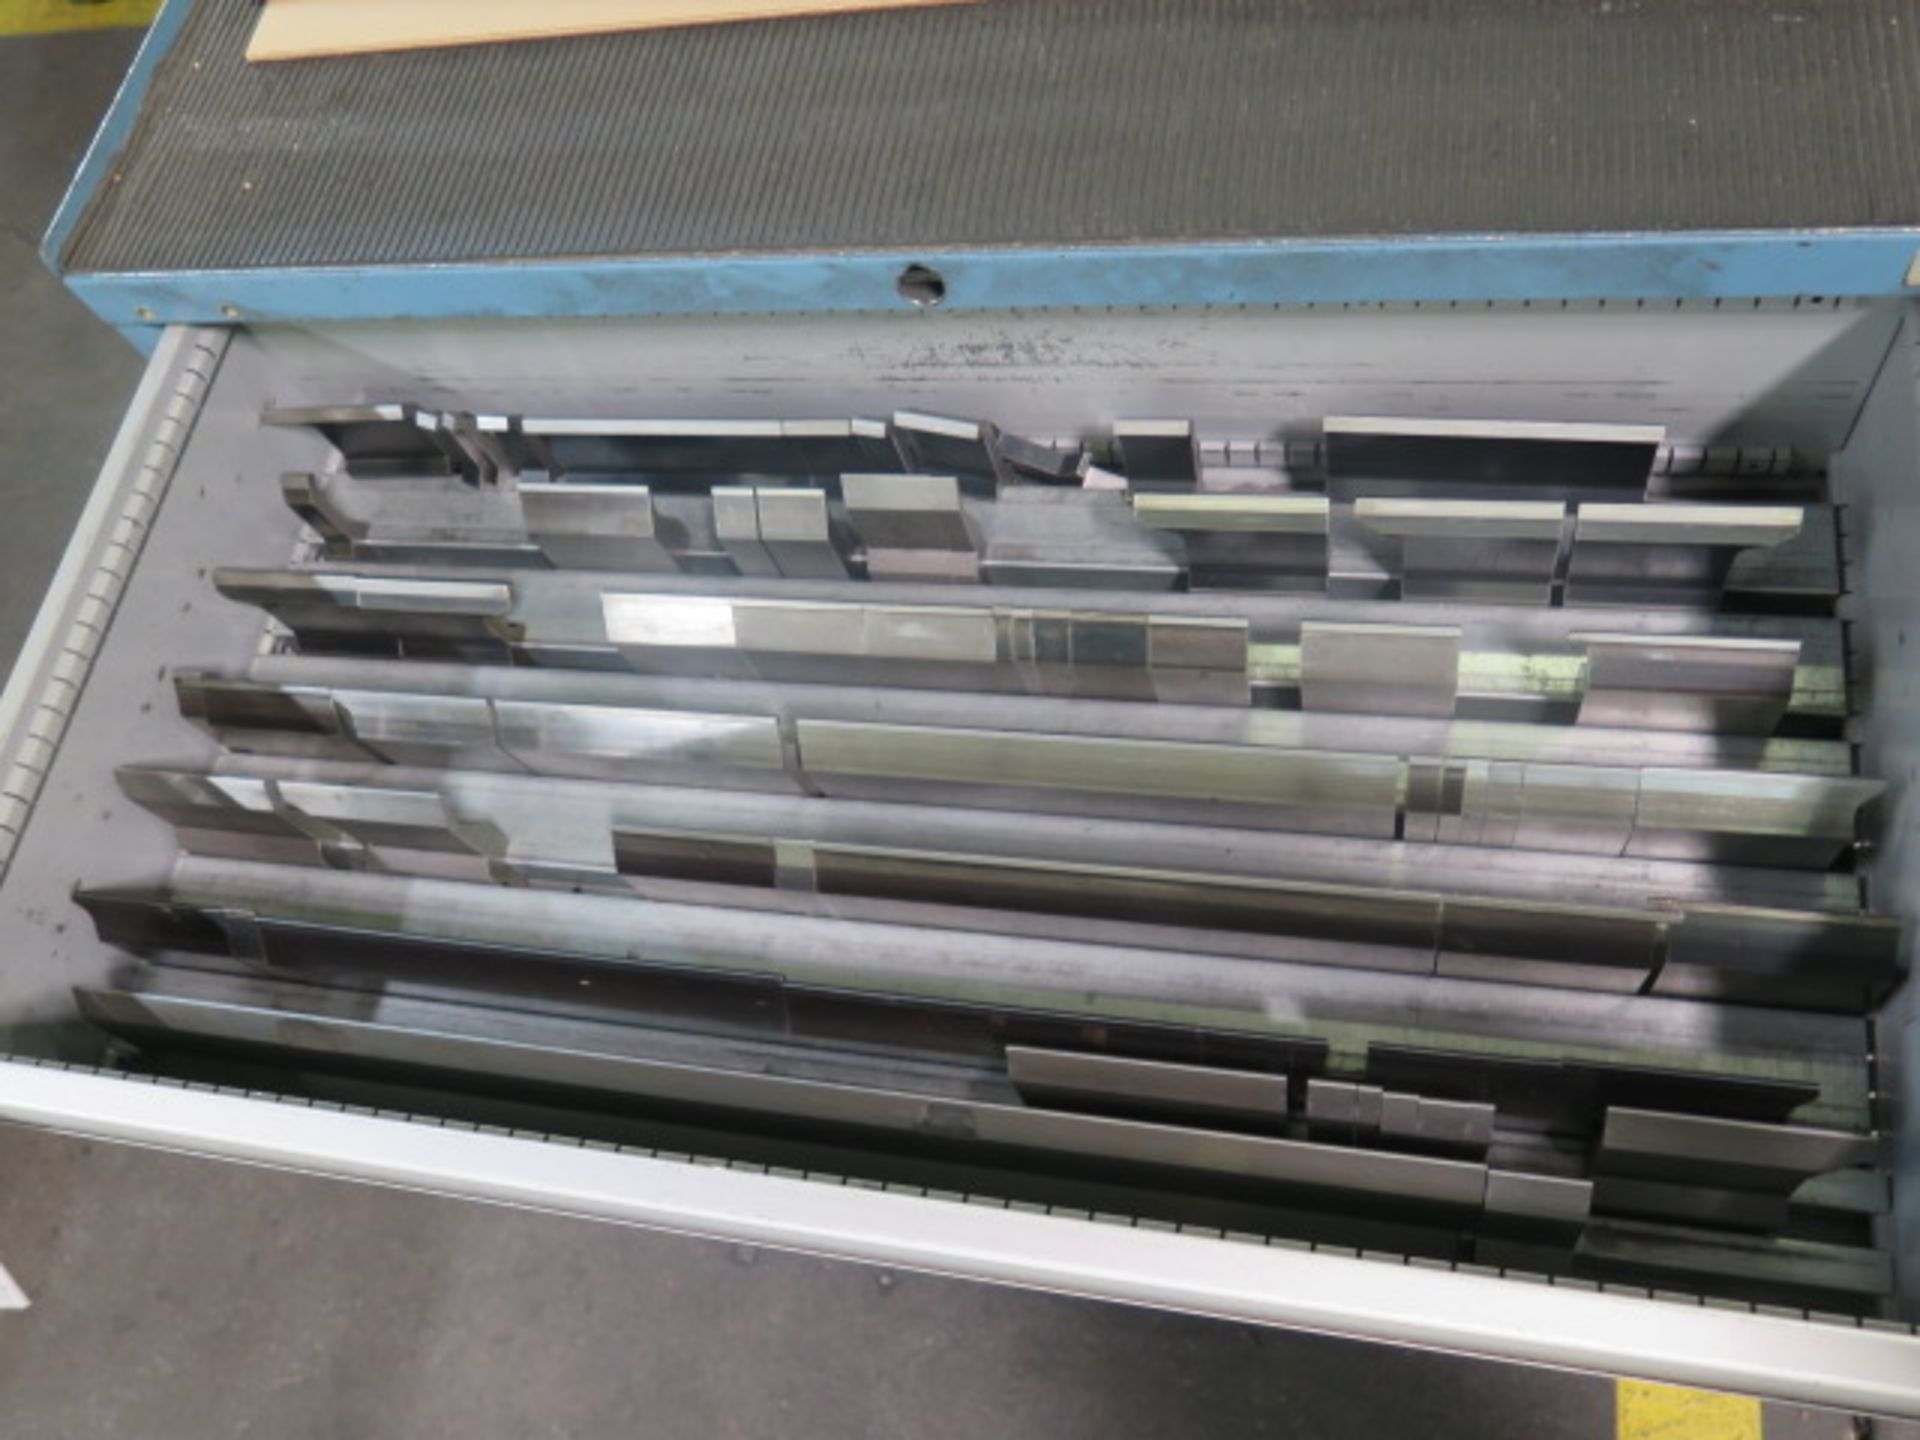 Amada Press Brake Tooling w/ Wilton Rolling Tooling Cabinet (SOLD AS-IS - NO WARRANTY) - Image 2 of 12